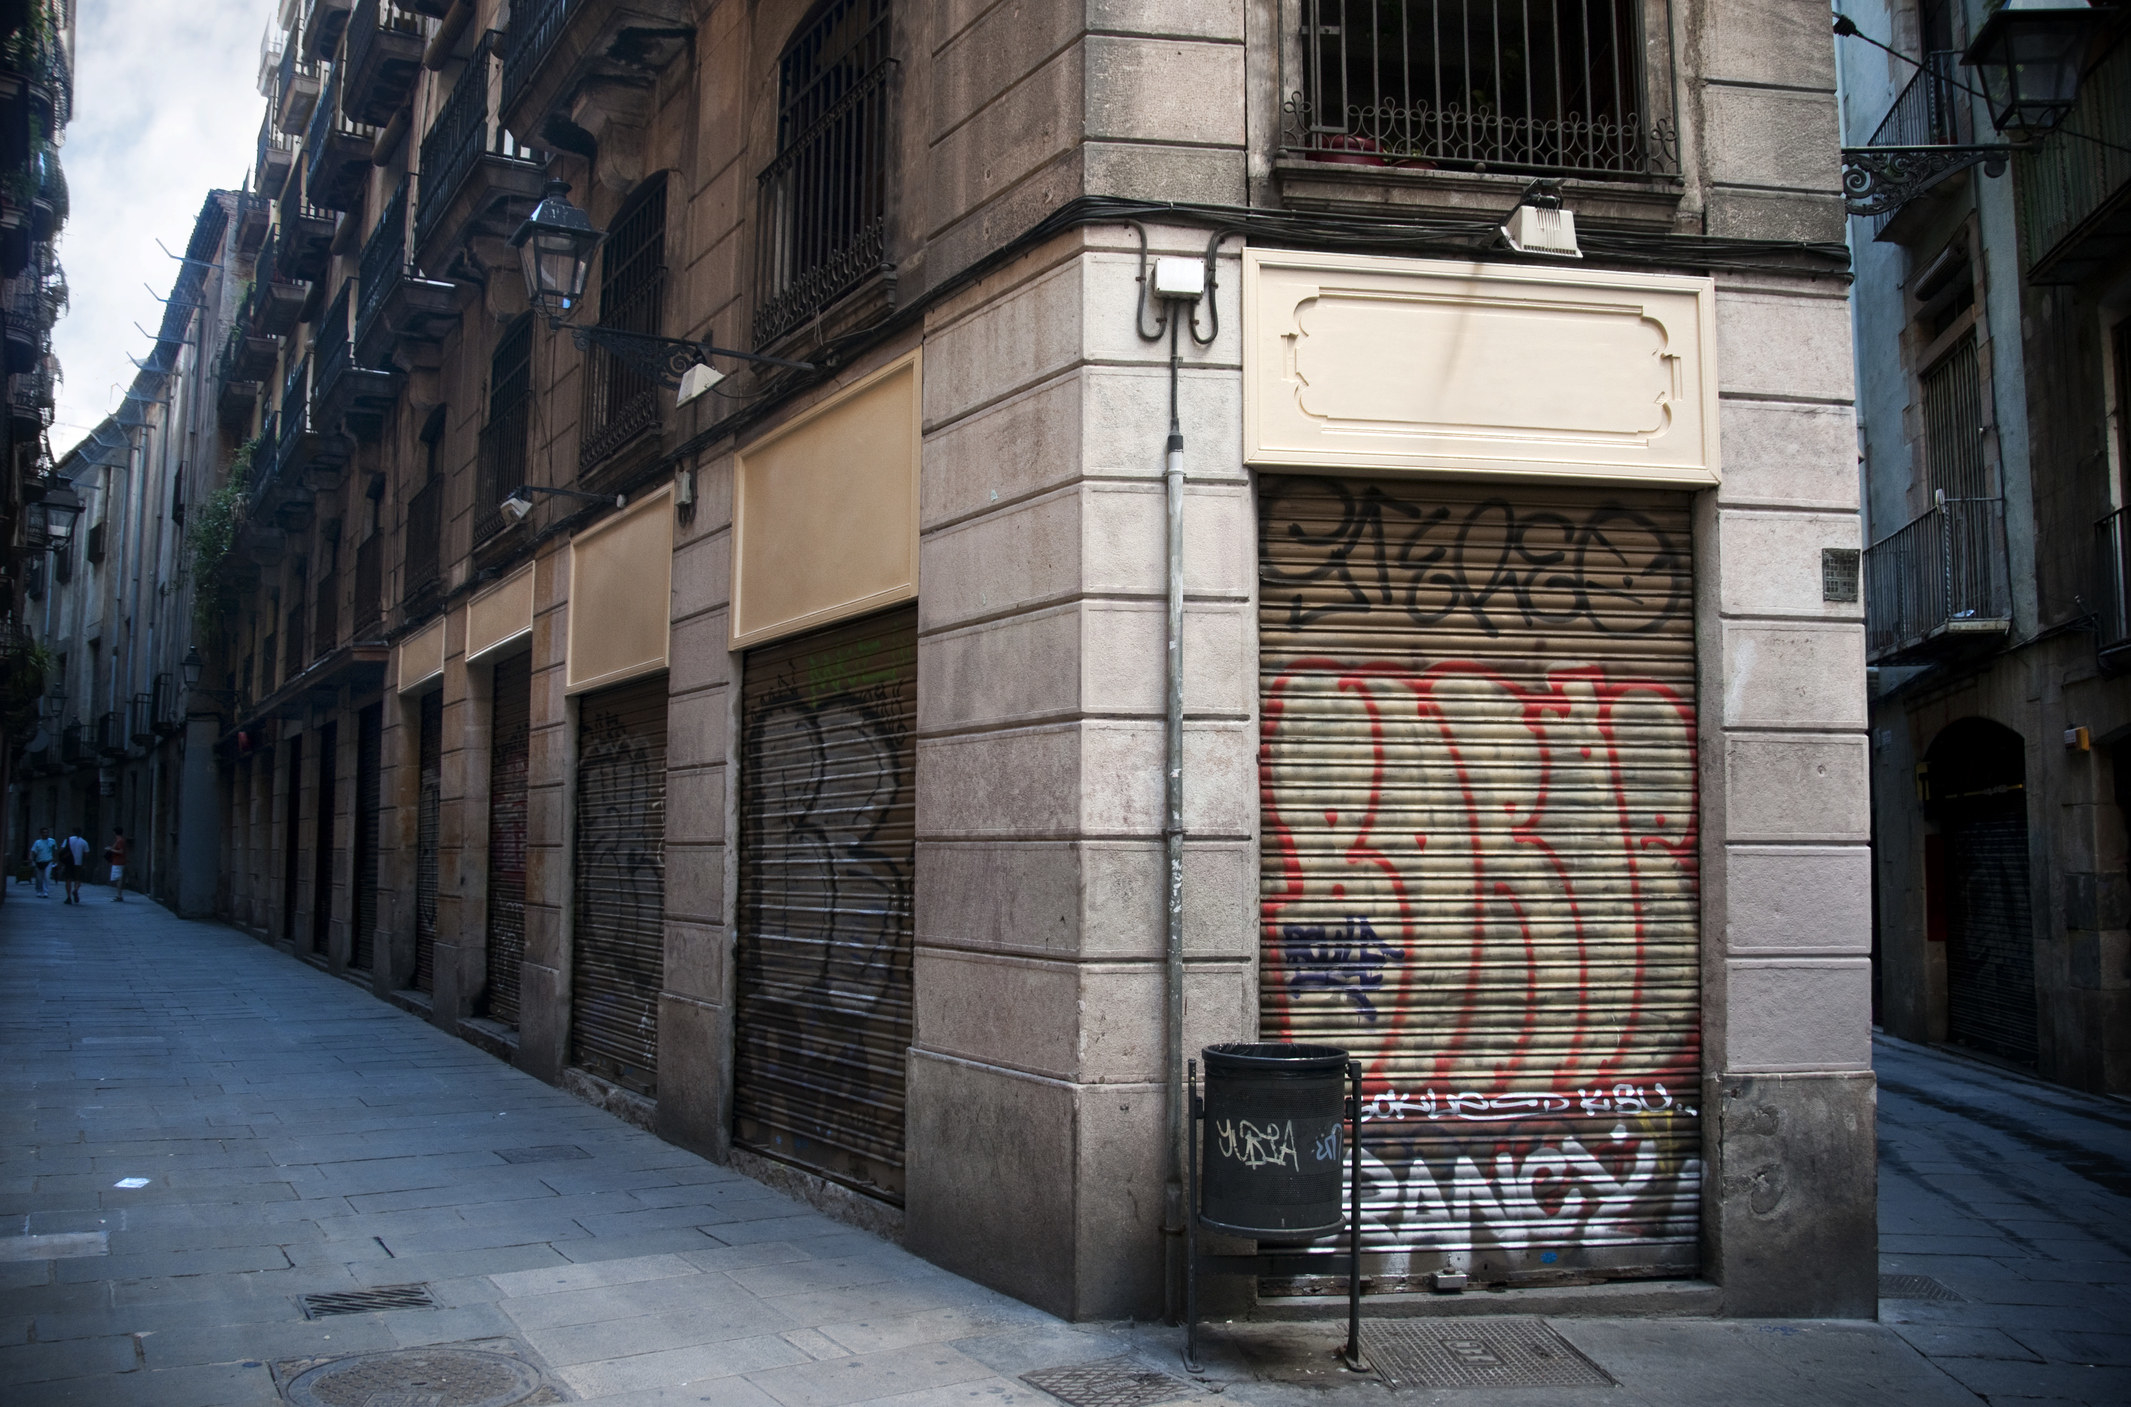 Closed storefronts in Barcelona.